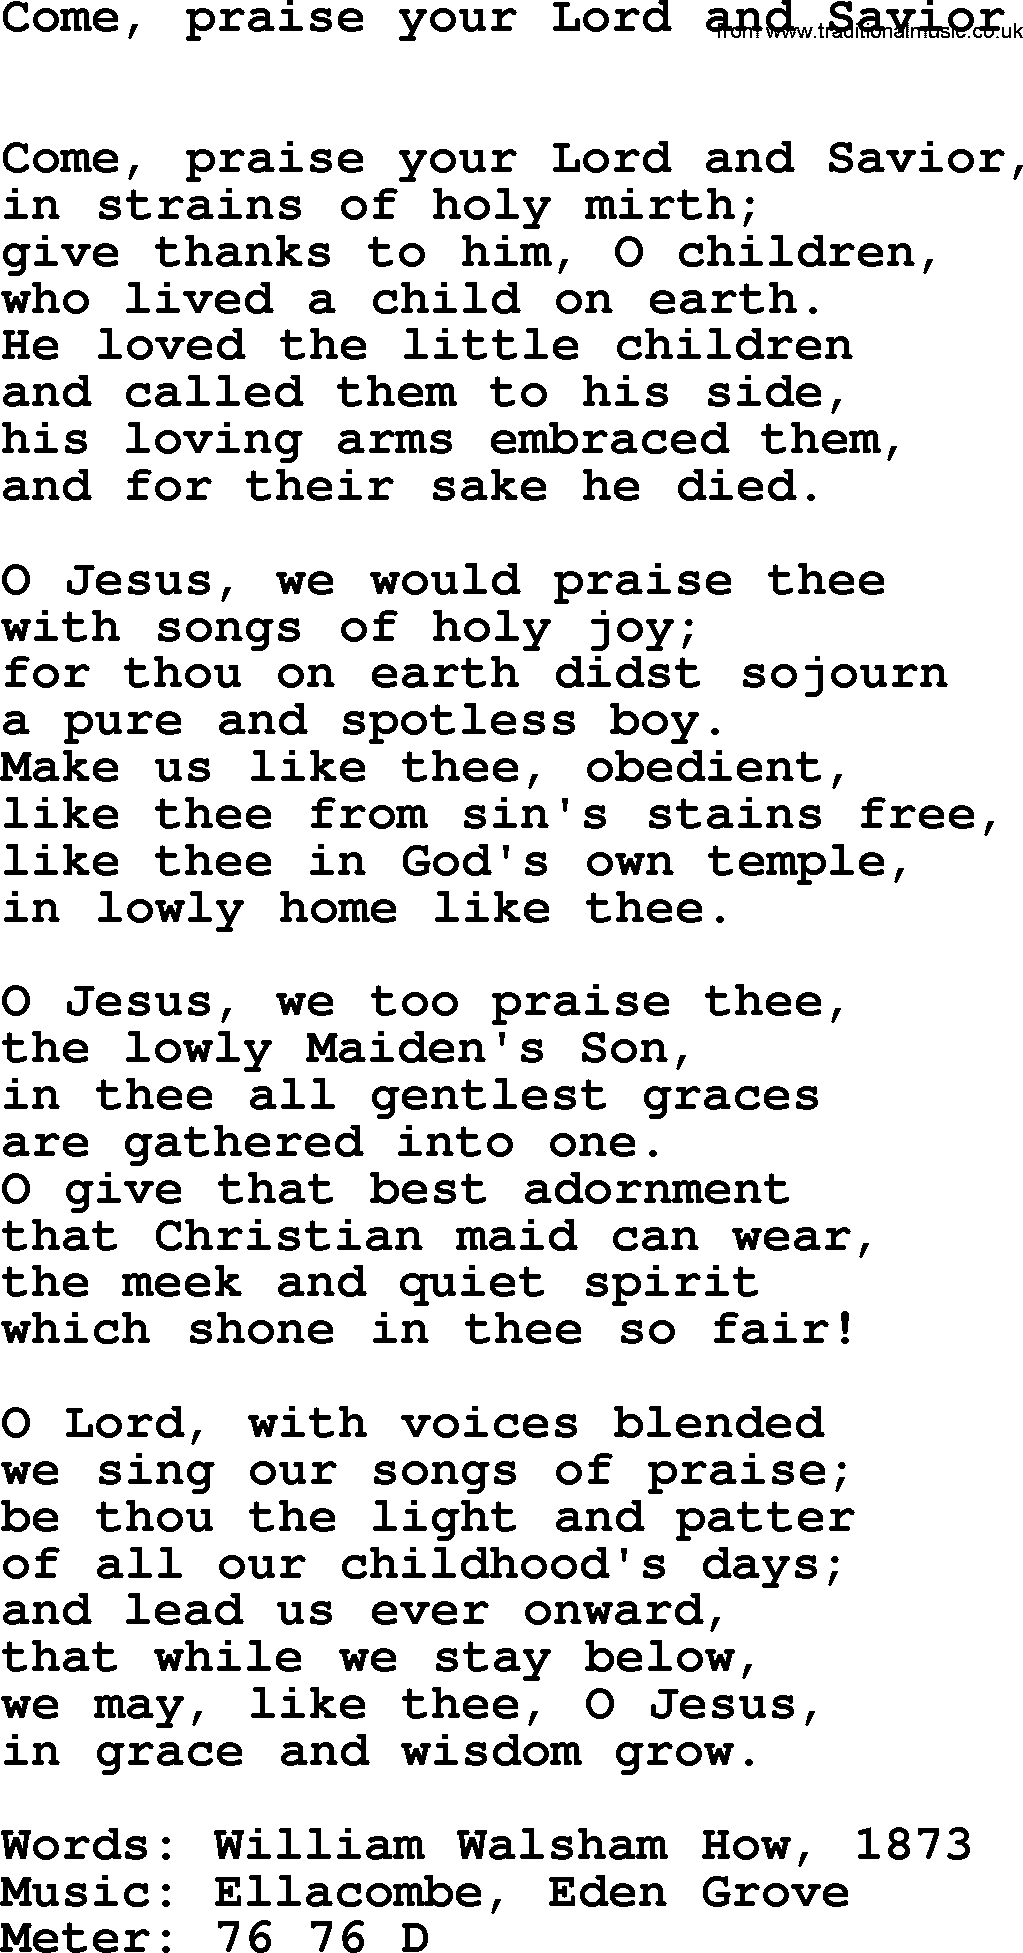 Book of Common Praise Hymn: Come, Praise Your Lord And Savior.txt lyrics with midi music